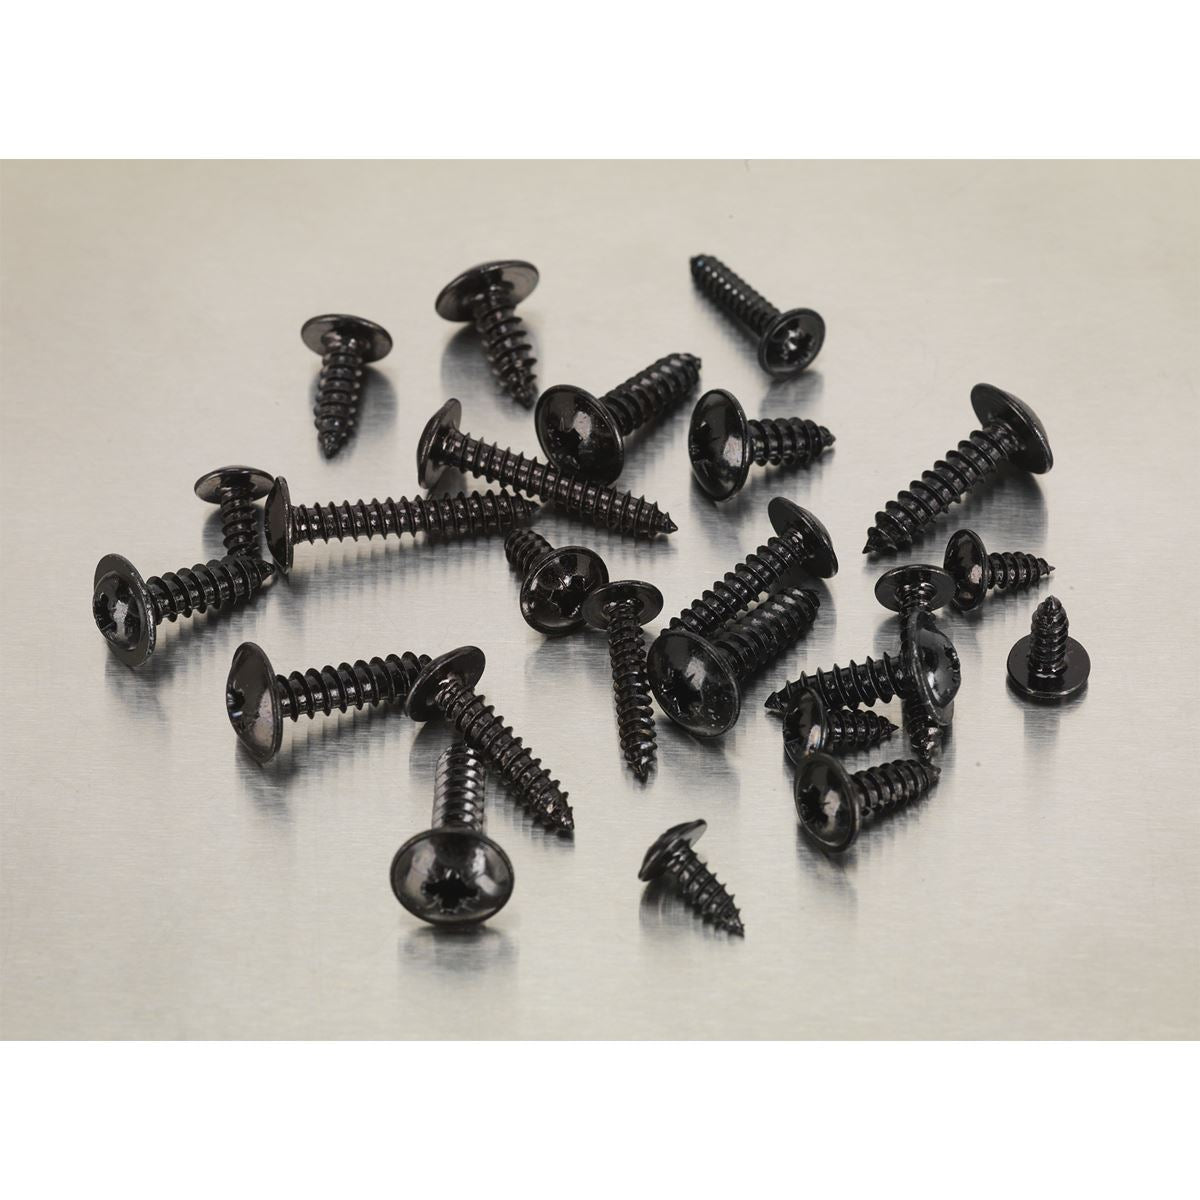 Sealey Self-Tapping Screw Assortment 700pc Flanged Head